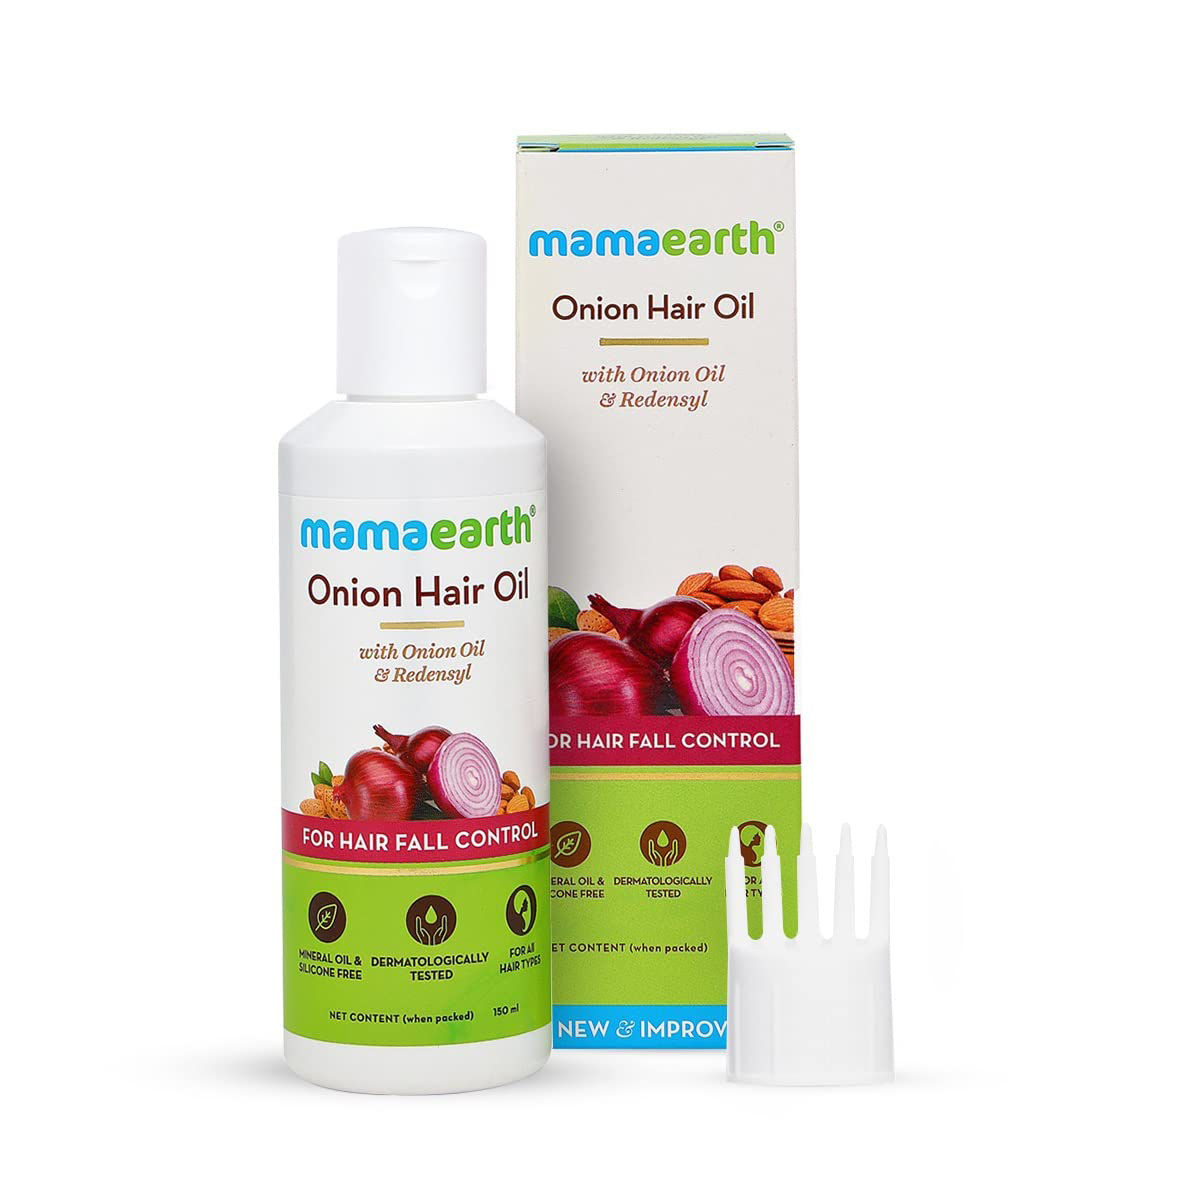 Mamaearth Onion Hair Oil with Onion Oil & Redensyl, 150 ml Price, Uses,  Side Effects, Composition - Apollo Pharmacy